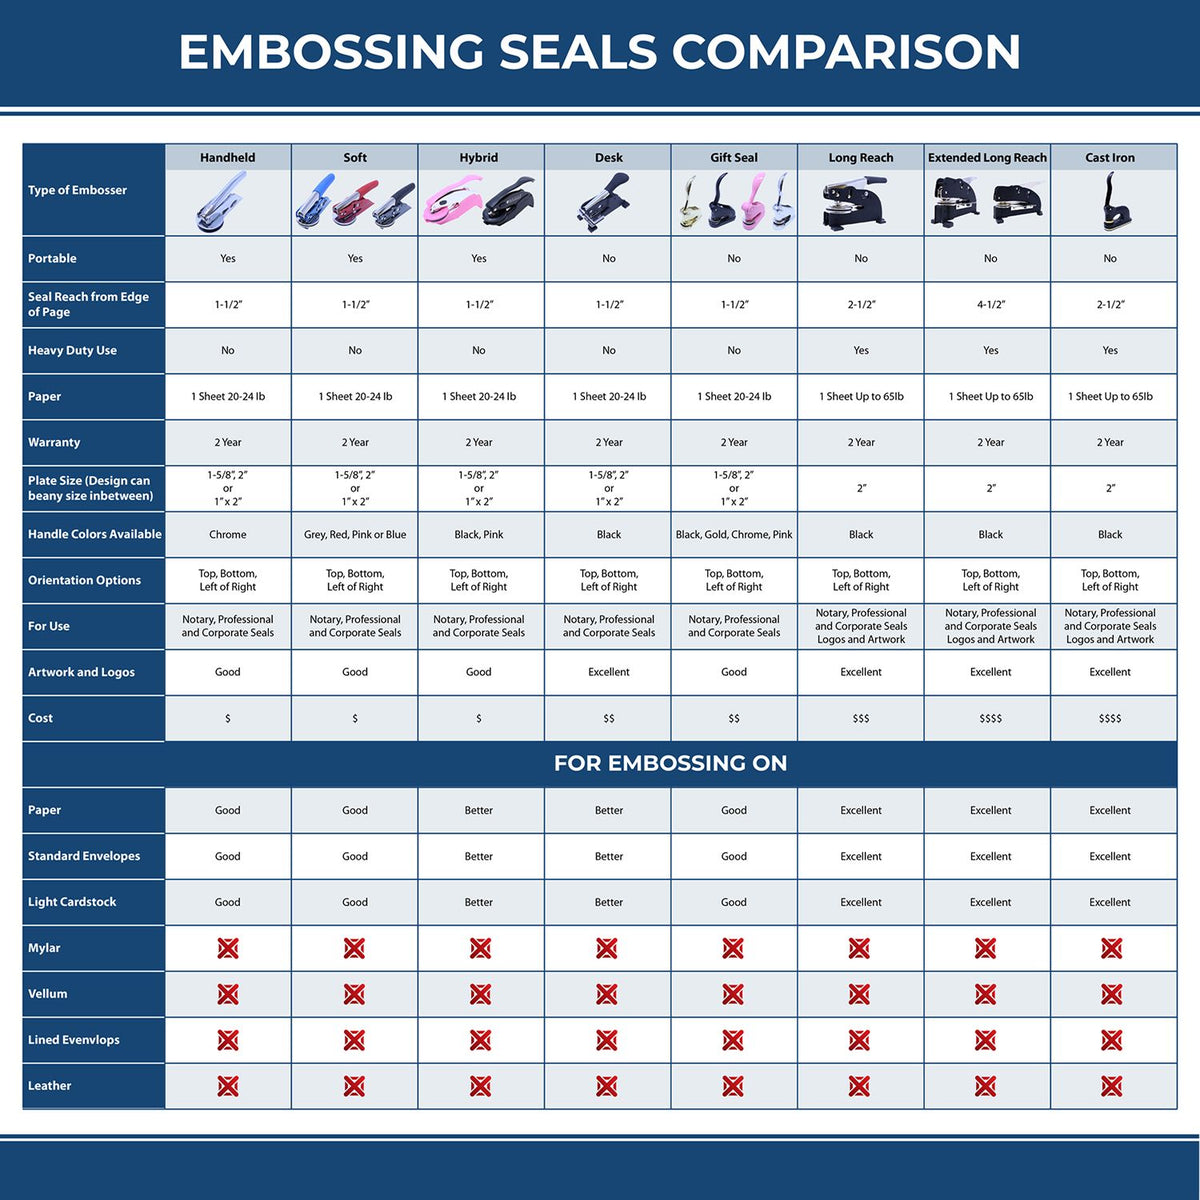 A comparison chart for the different types of mount models available for the Heavy Duty Cast Iron Iowa Land Surveyor Seal Embosser.